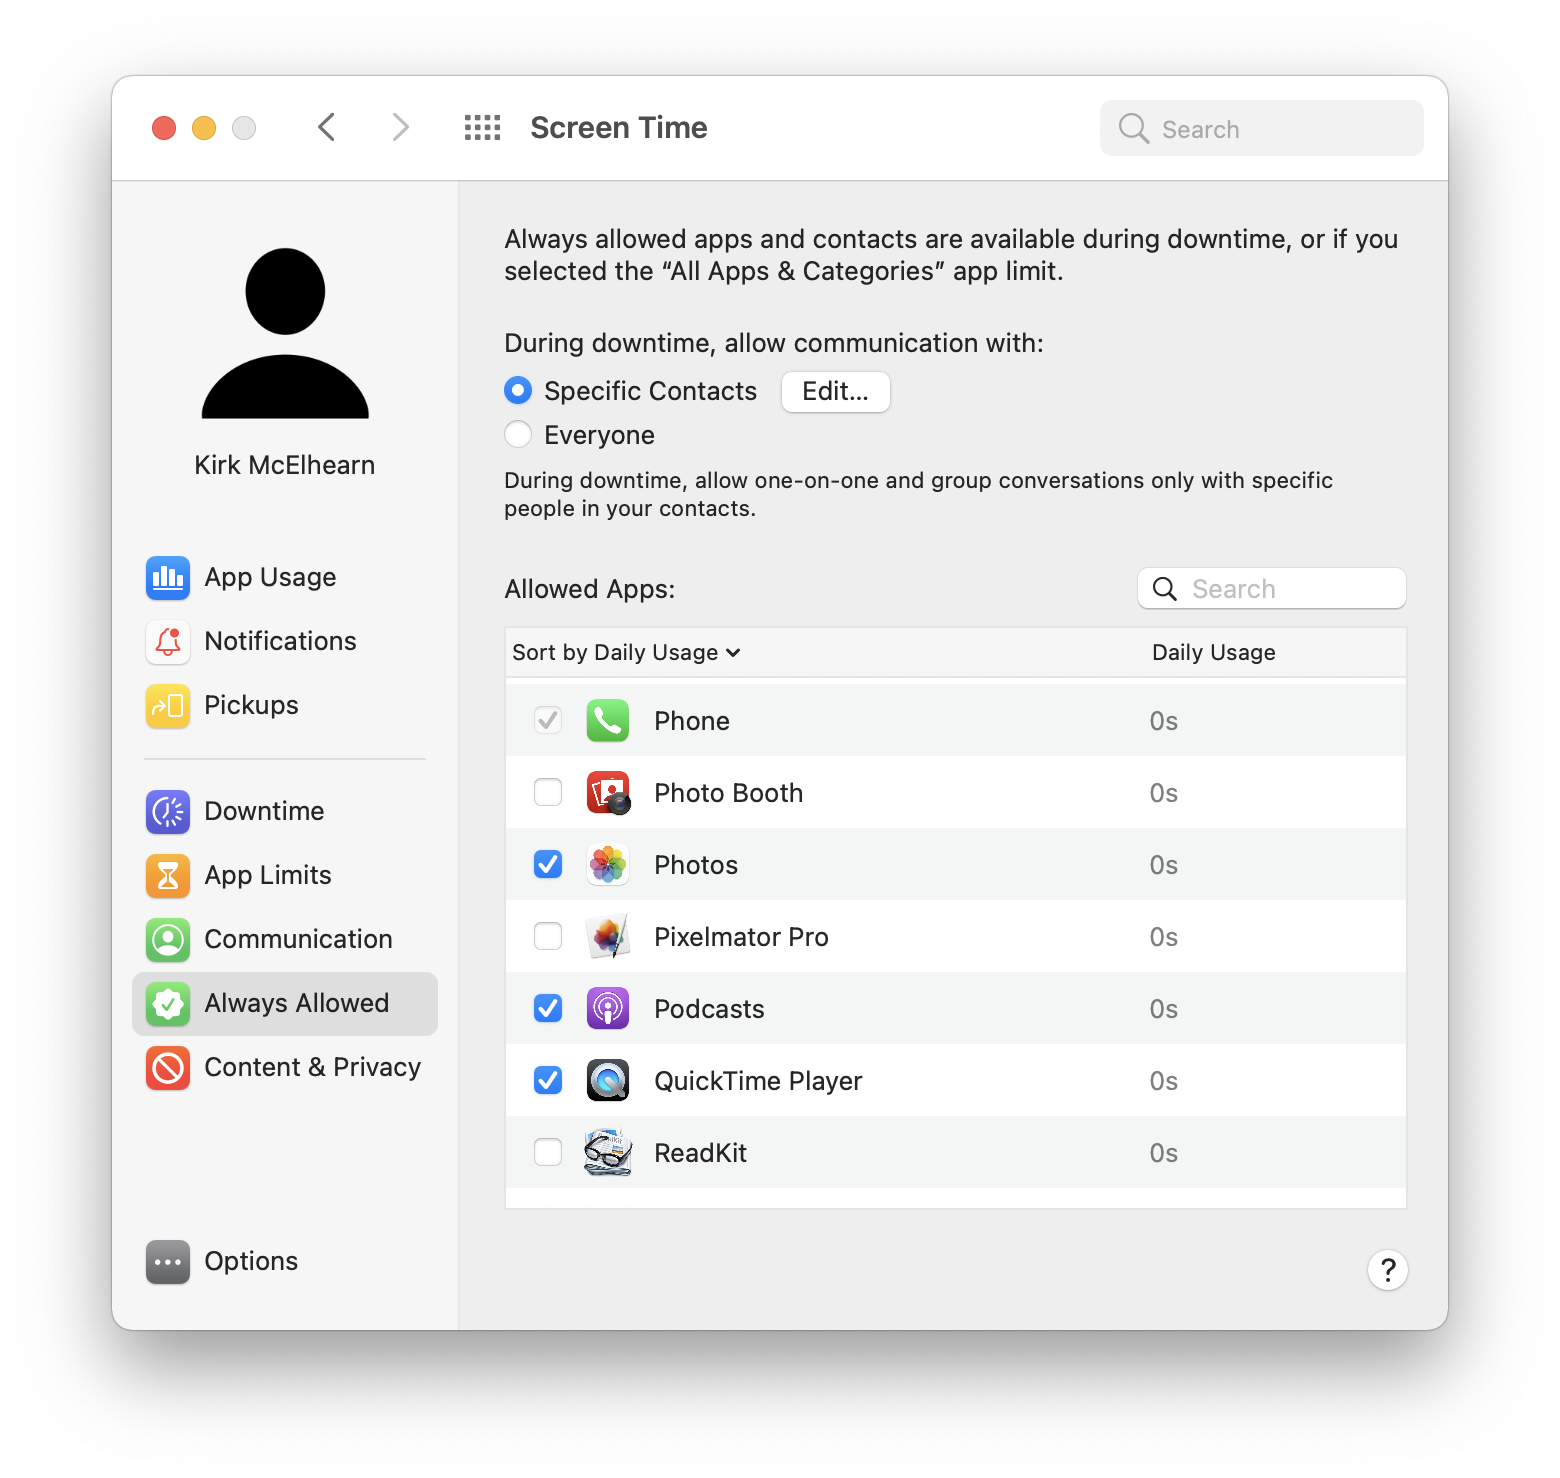 delete more than one user profile for mac os x